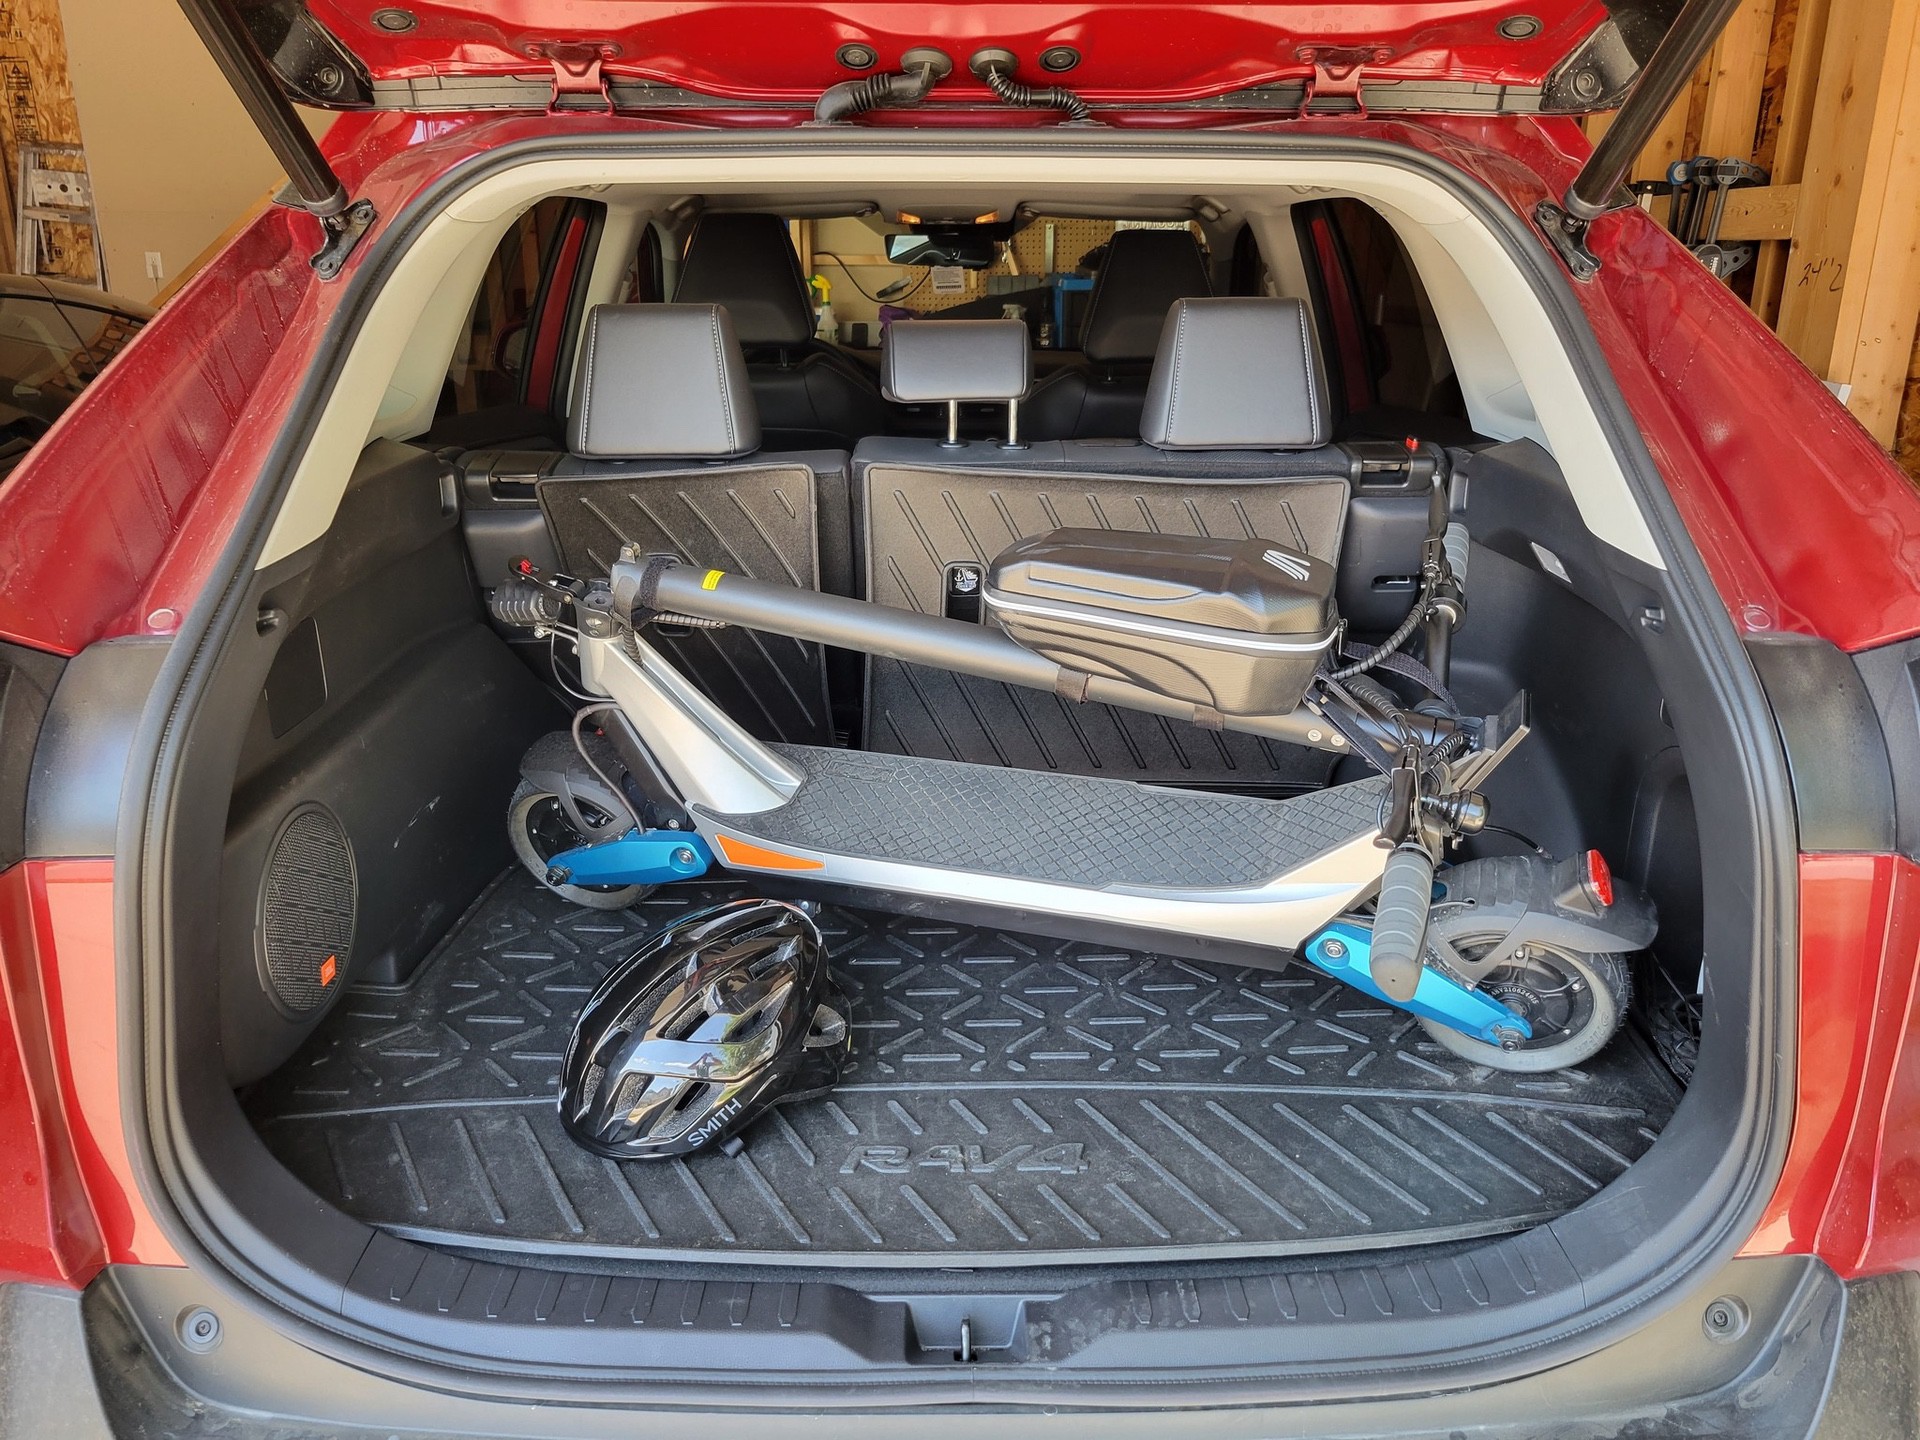 Varla Pegasus Scooter folded and packed in hatchback trunk